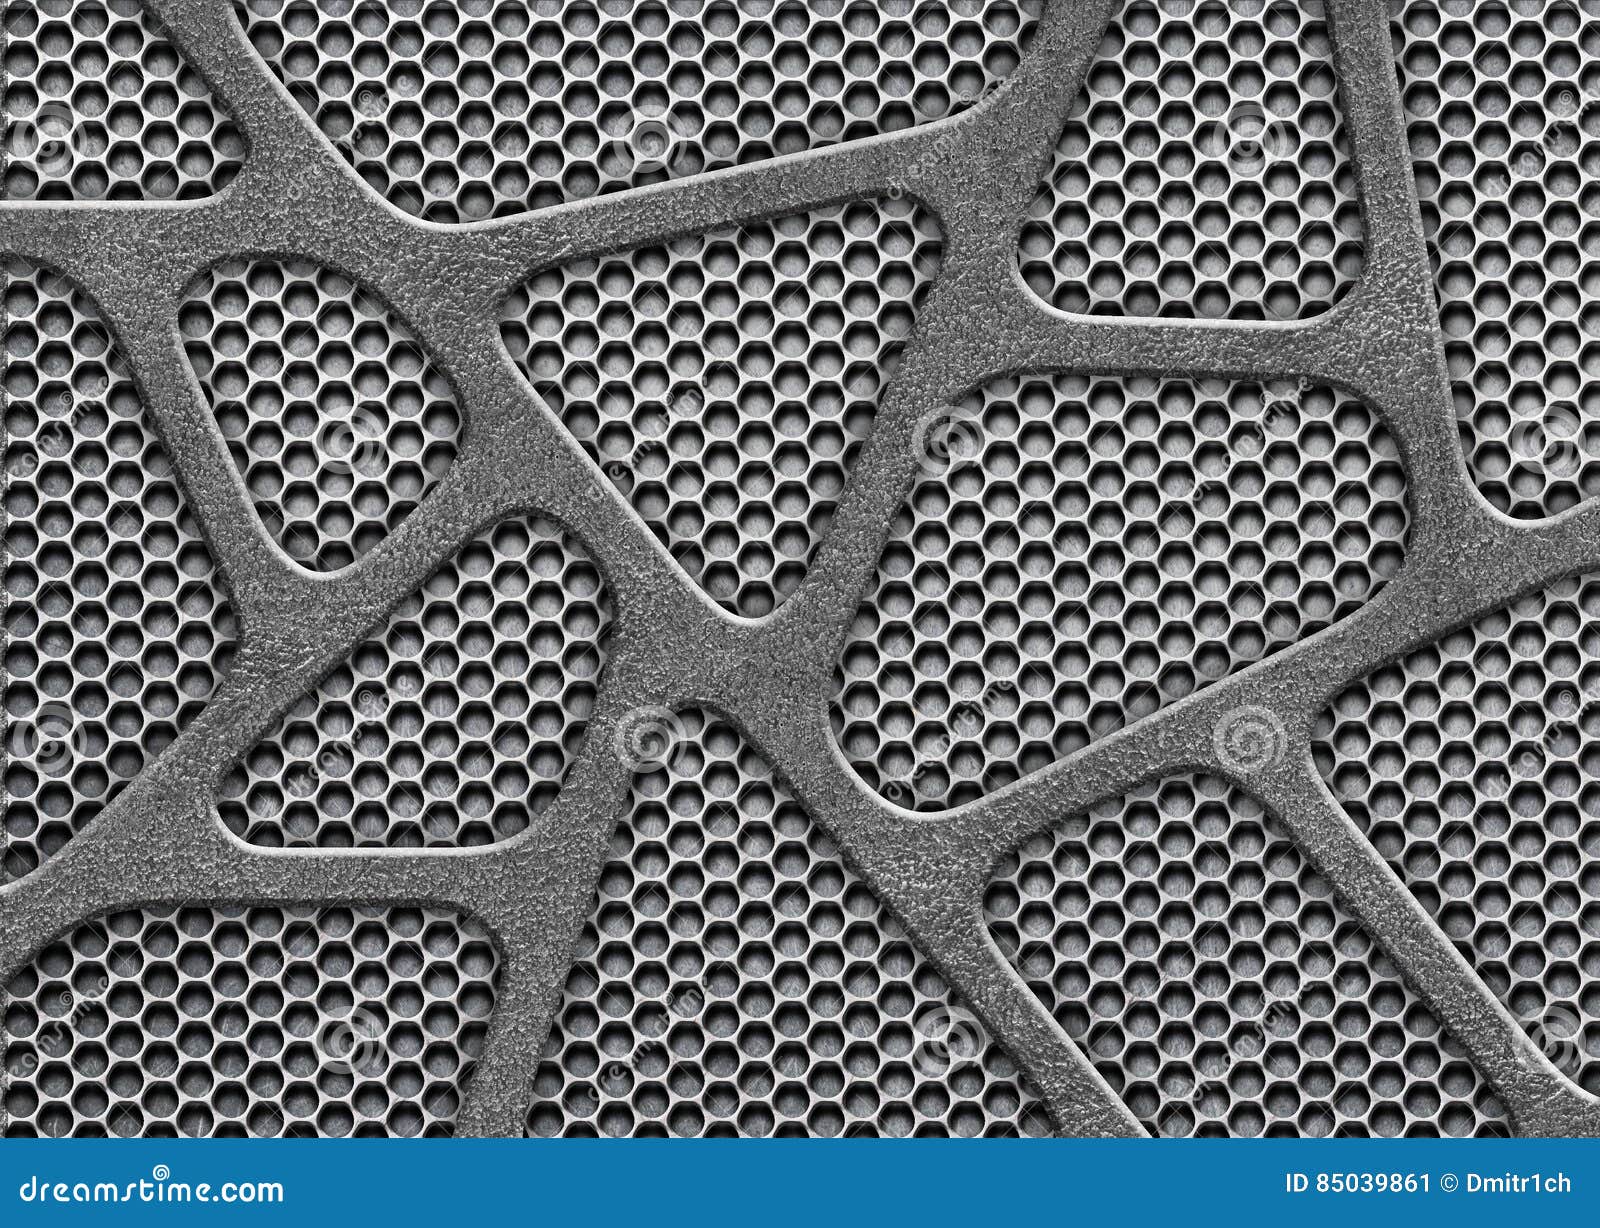 Metal Mesh, Perforated Iron Pattern For Background Stock Image - Image